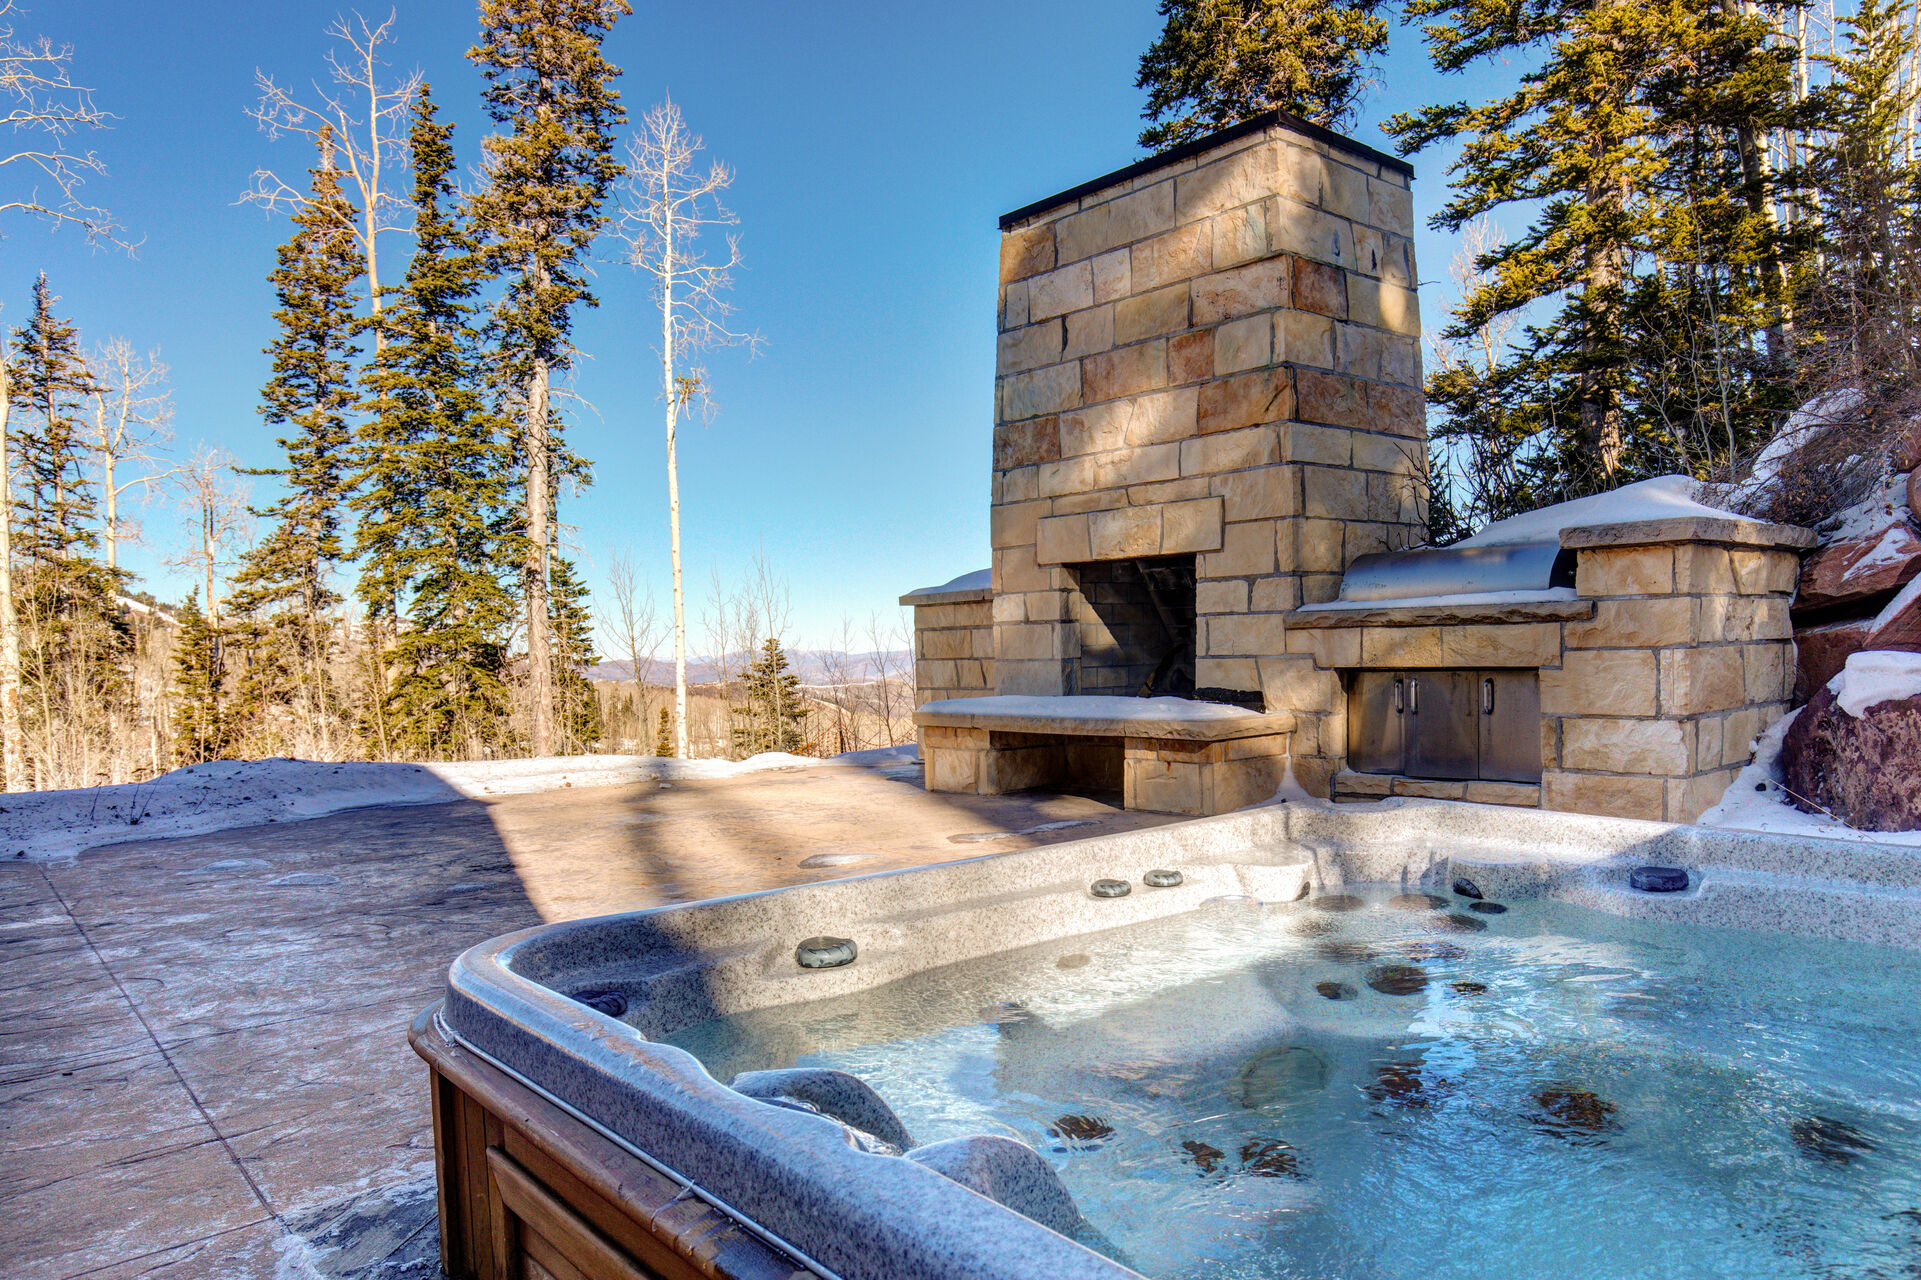 Large outdoor fireplace, private hot tub, and grilling area